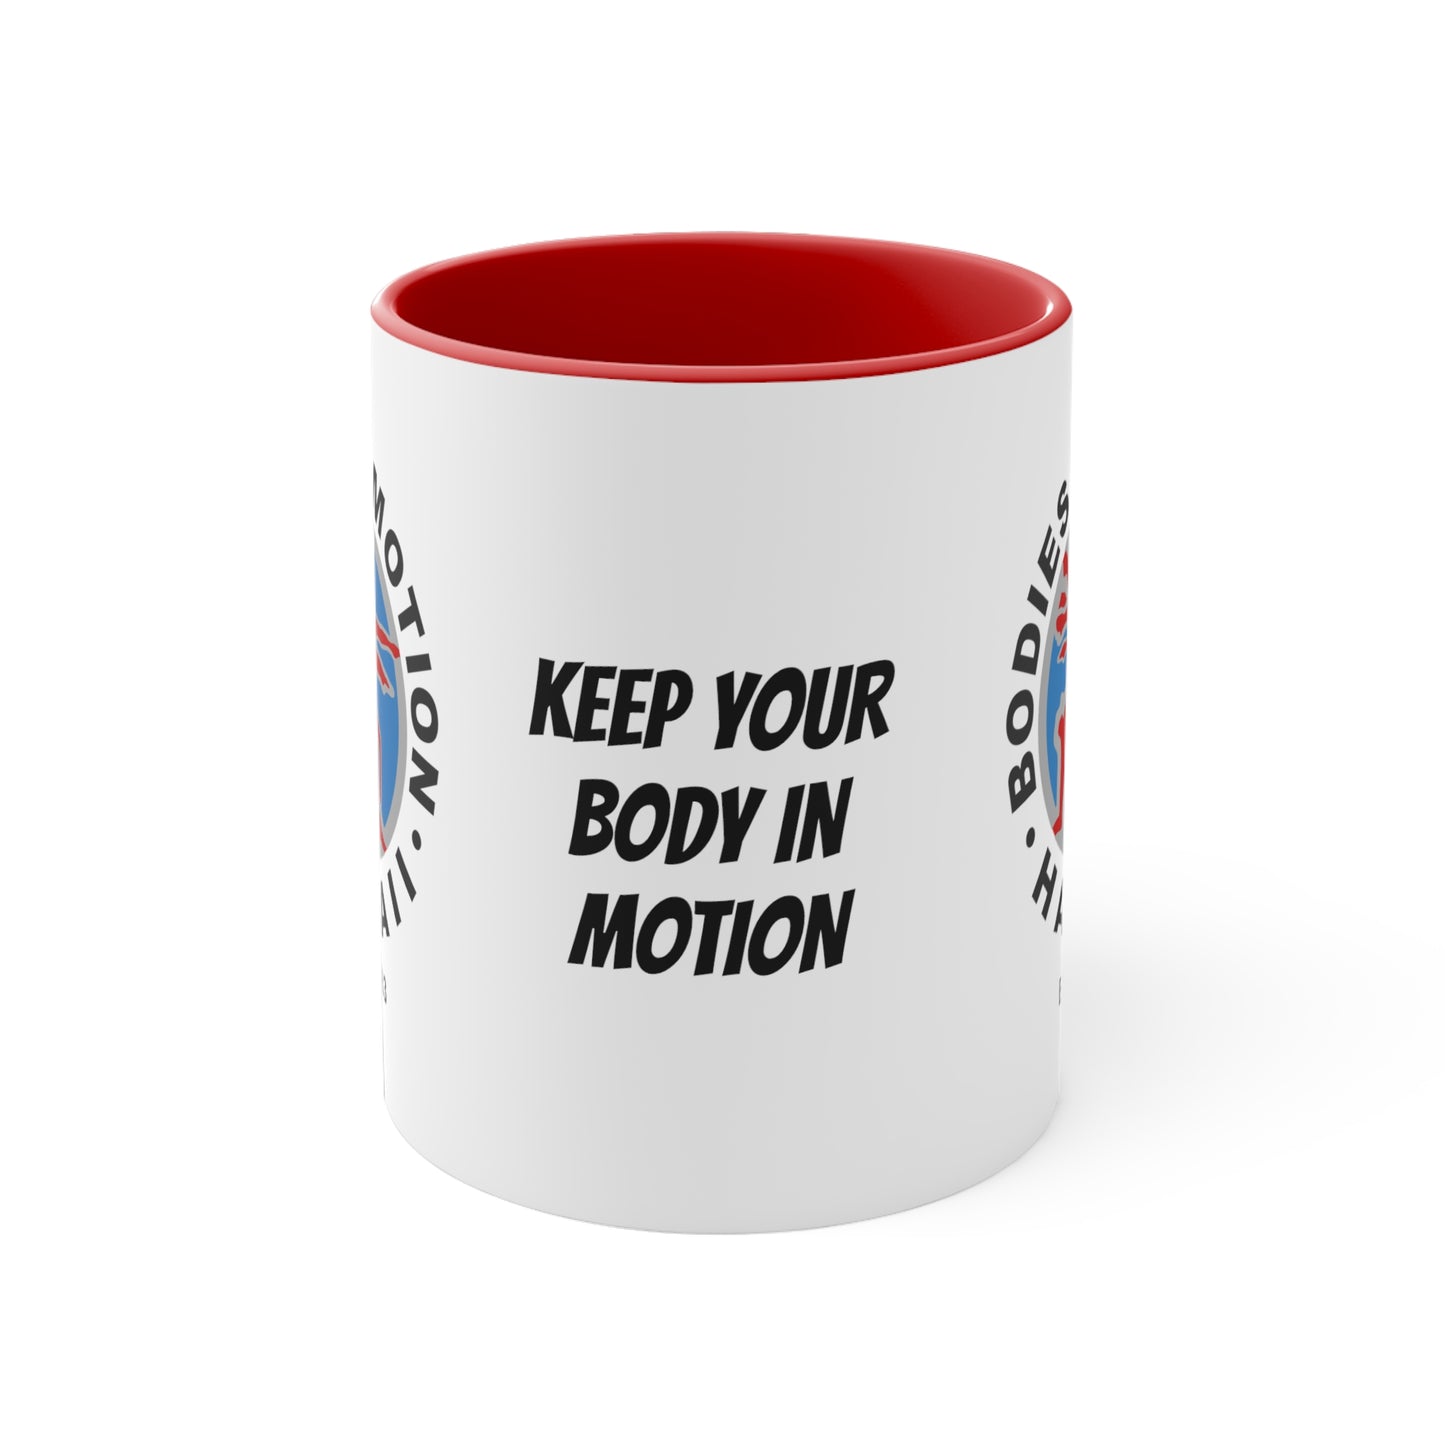 Keep Your Body in Motion Accent Coffee Mug, 11oz